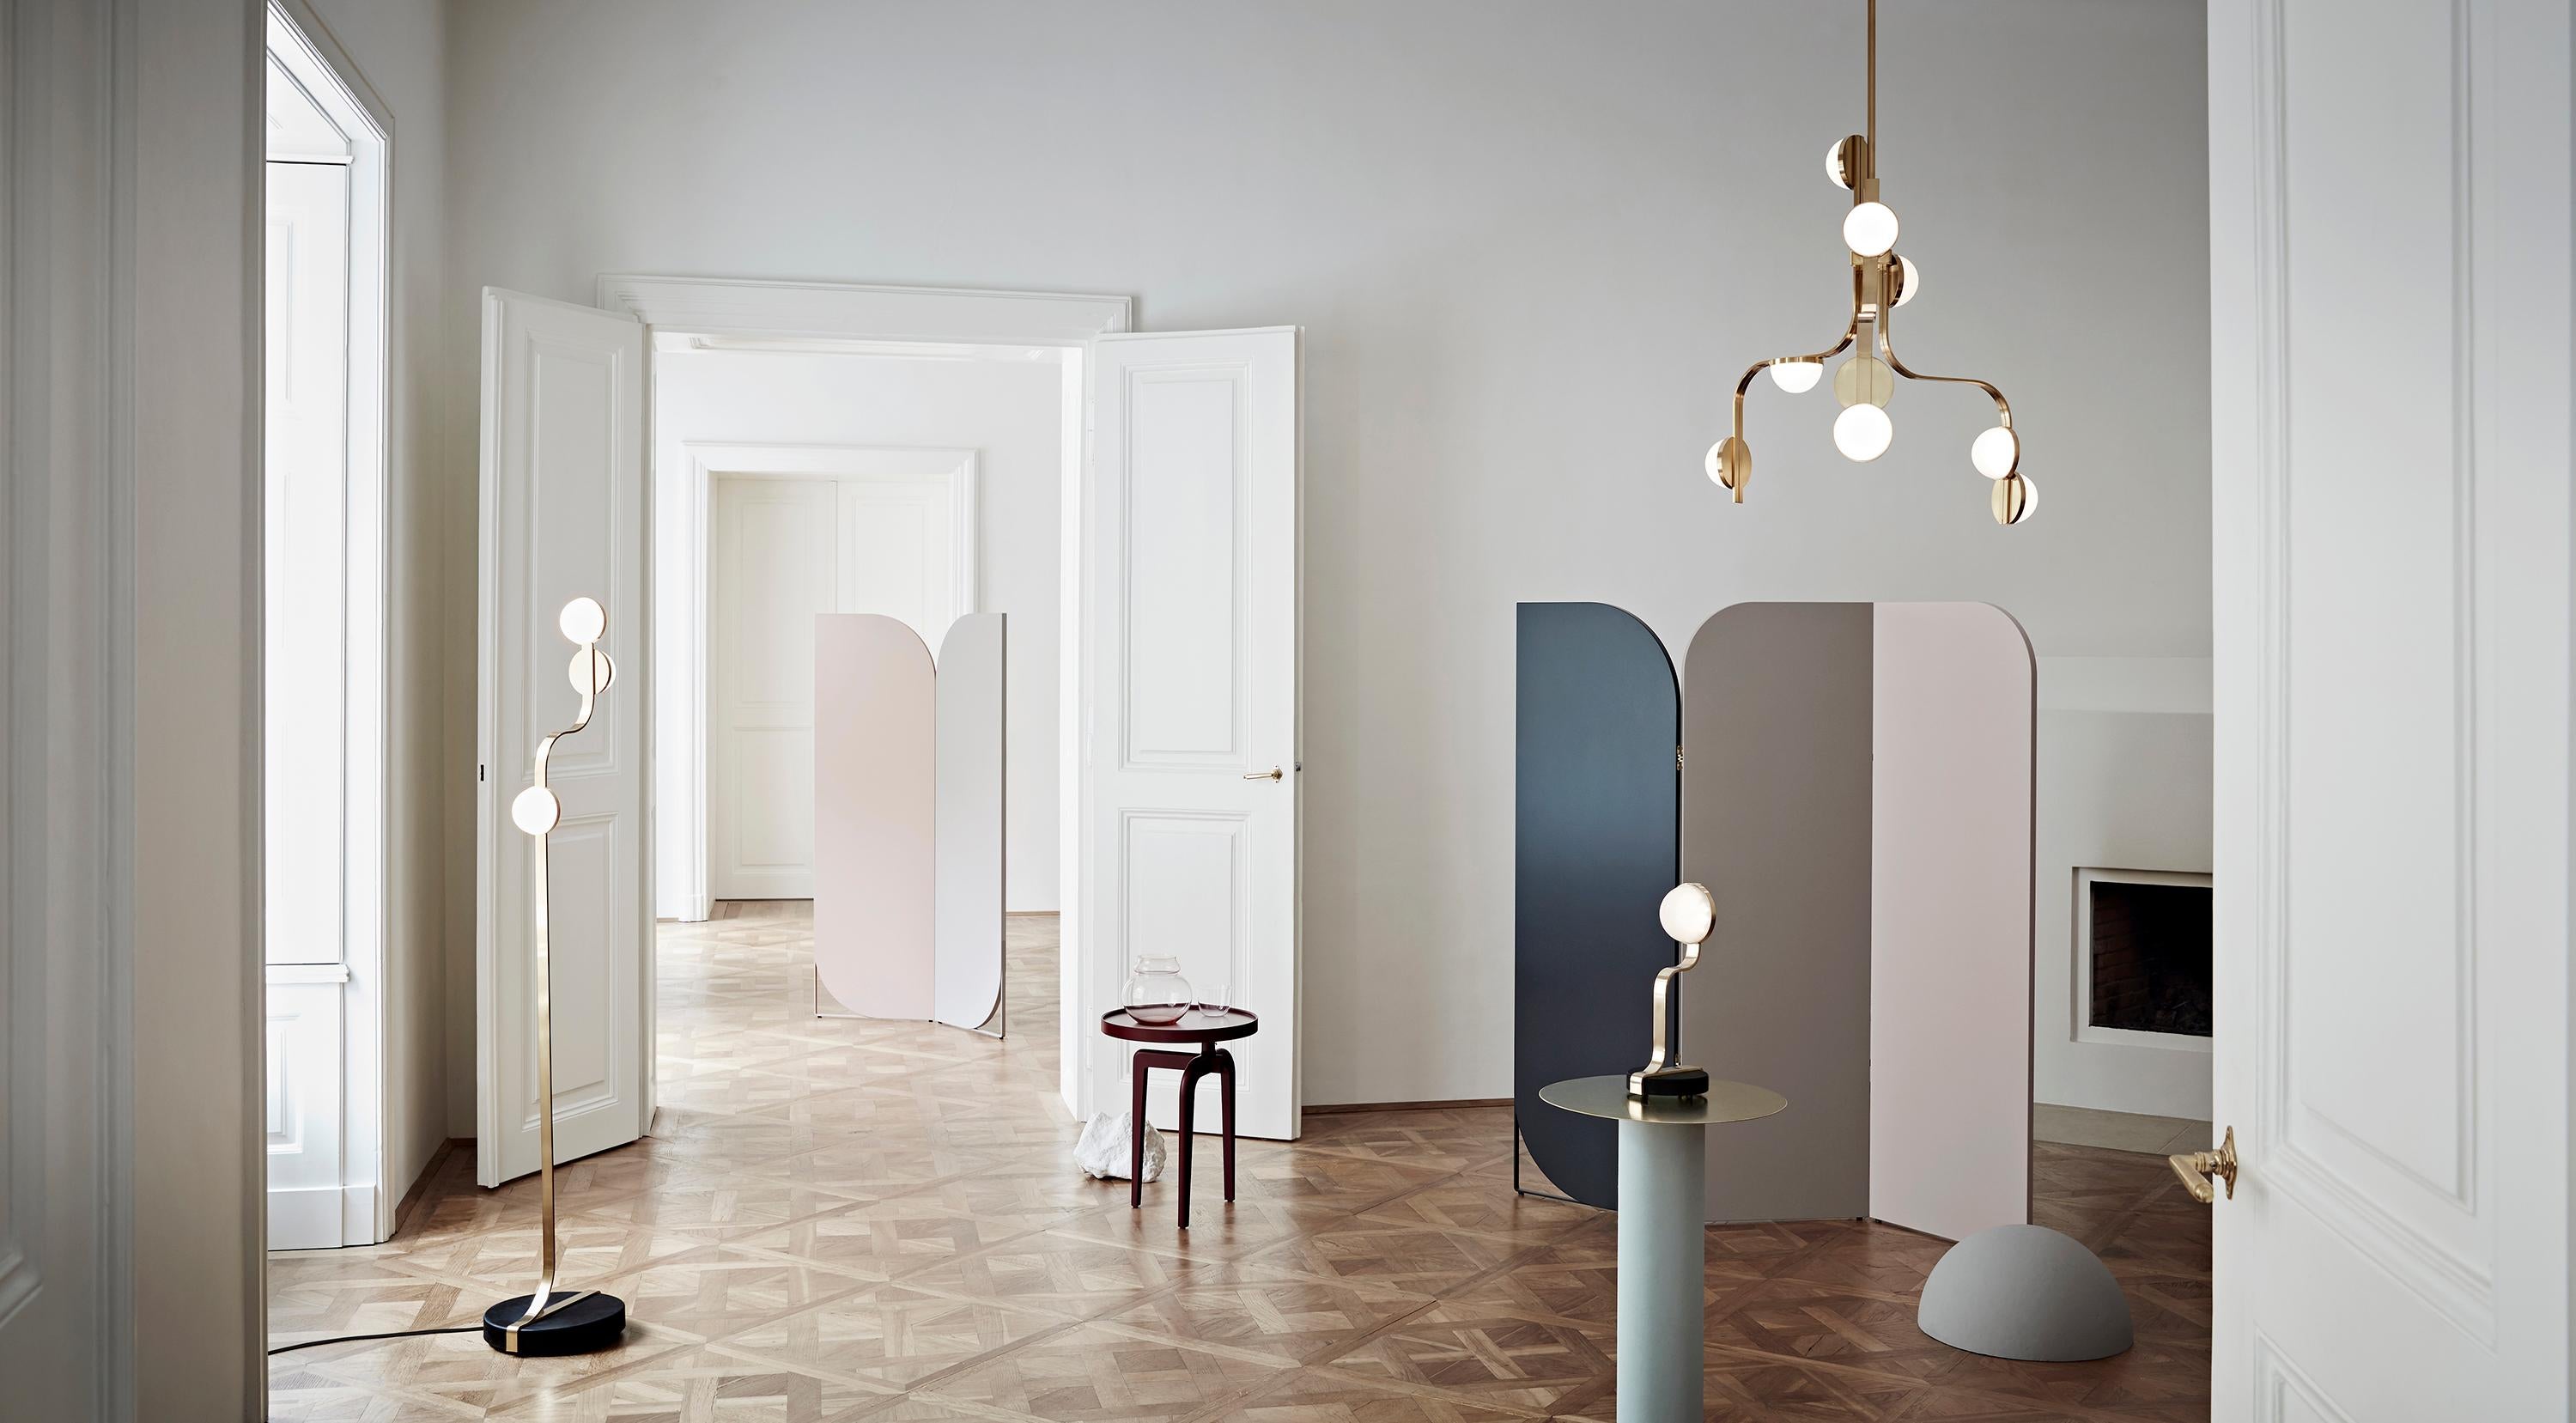 Vienna’s legendary glass manufacturer, Lobmeyr invites Sperlein to add his signature to its extensive catalogue and design legacy with a series of lights embodying Lobmeyr’s artisanal dexterity. The London based designer creates the Script lights